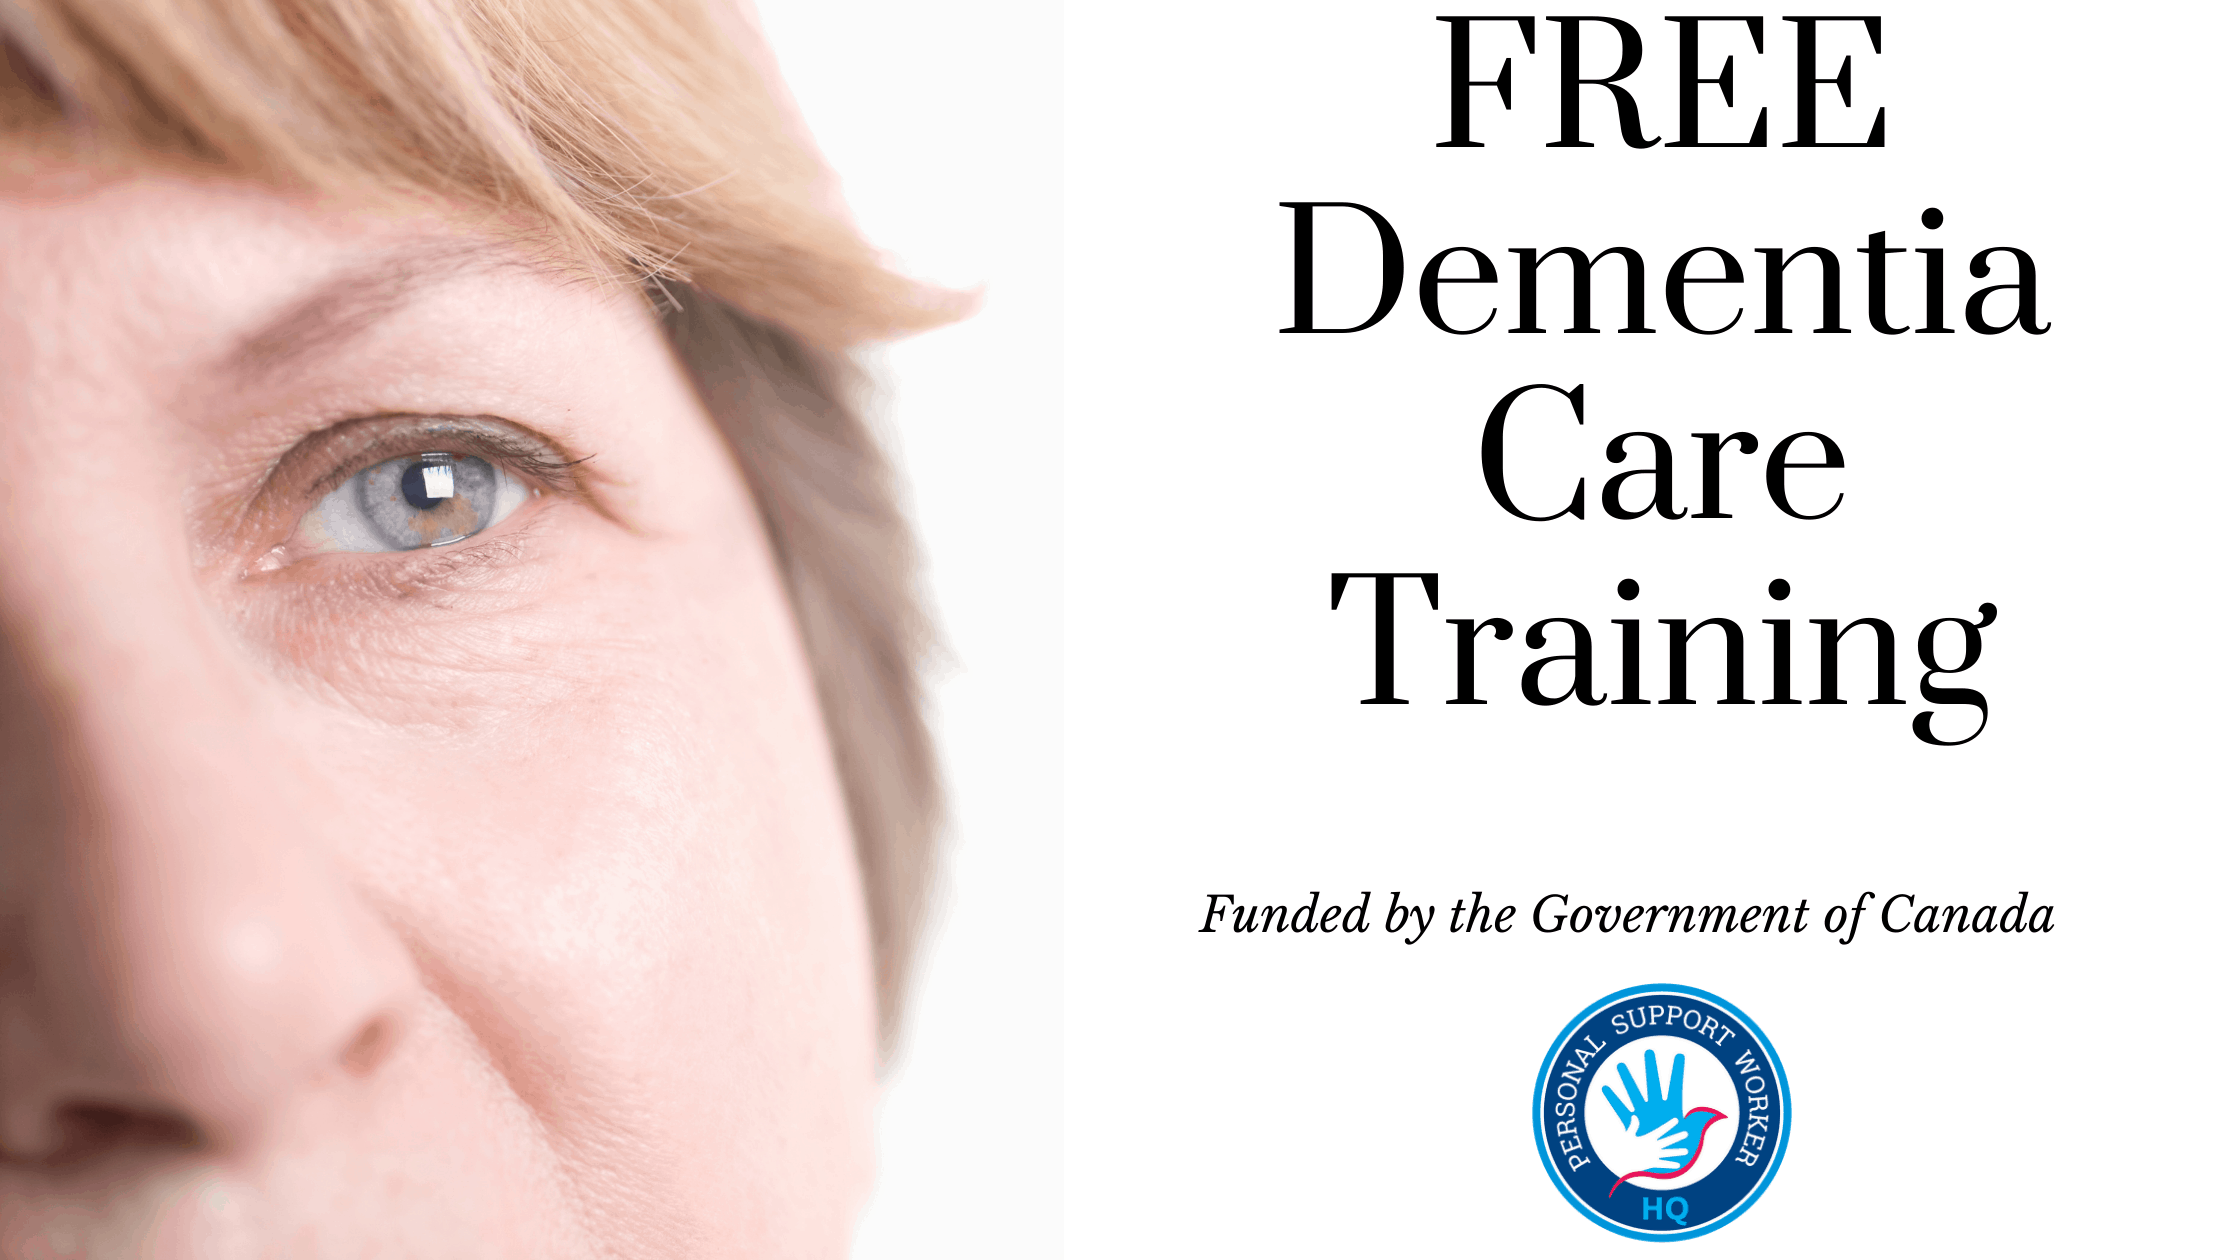 Free dementia care training funded by the Government of Canada